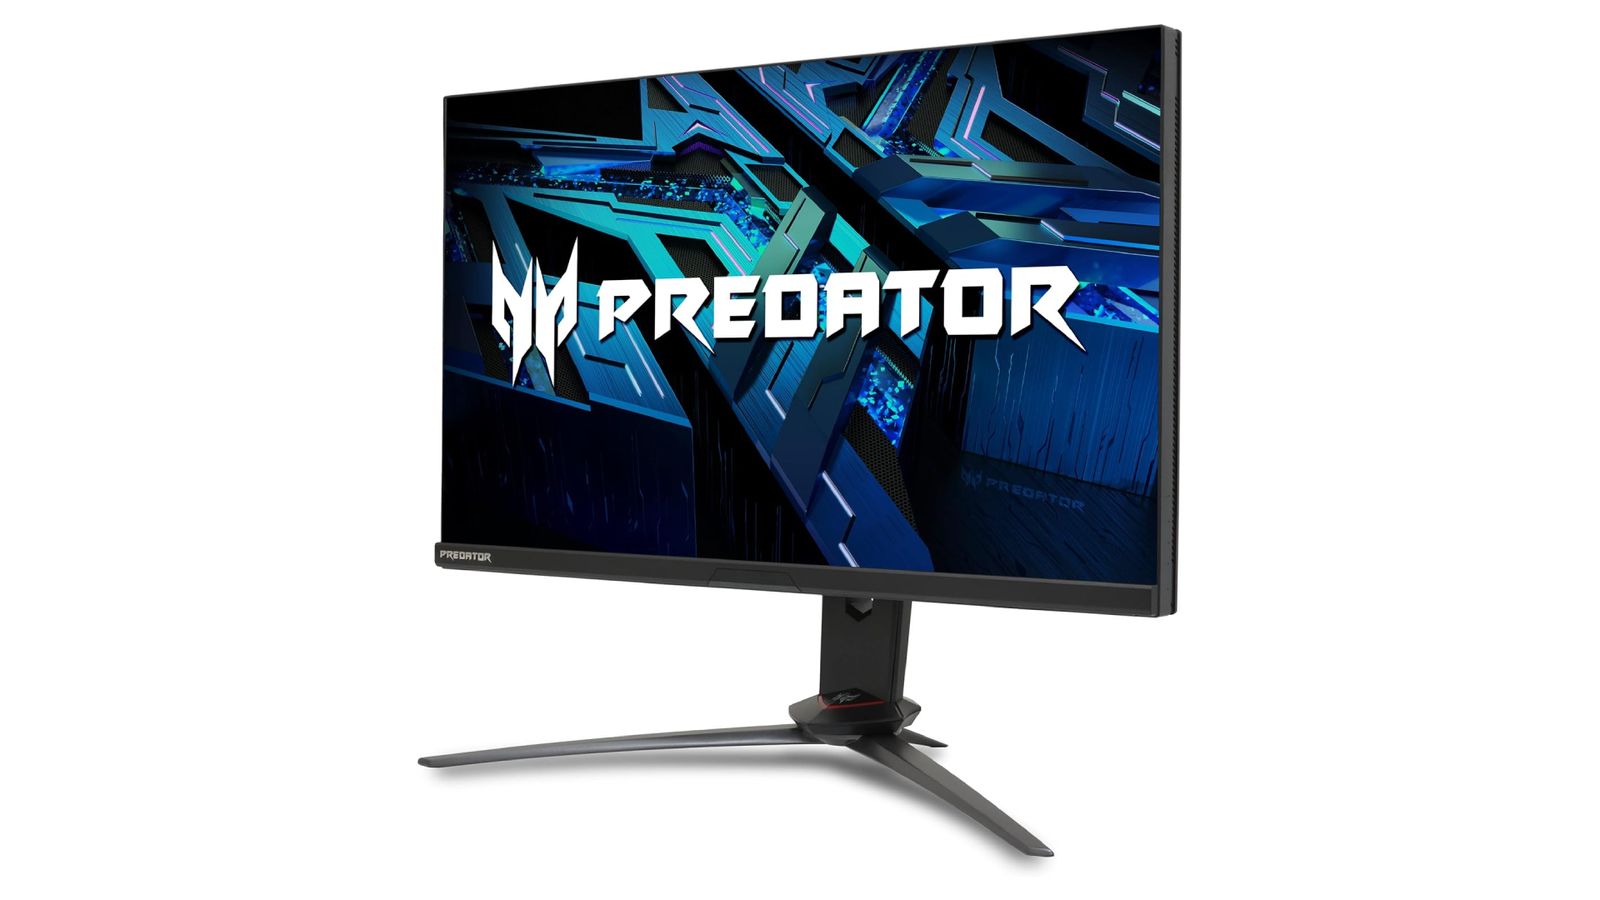 Acer Predator XB273U product image of a black monitor featuring white Predator branding on the display.